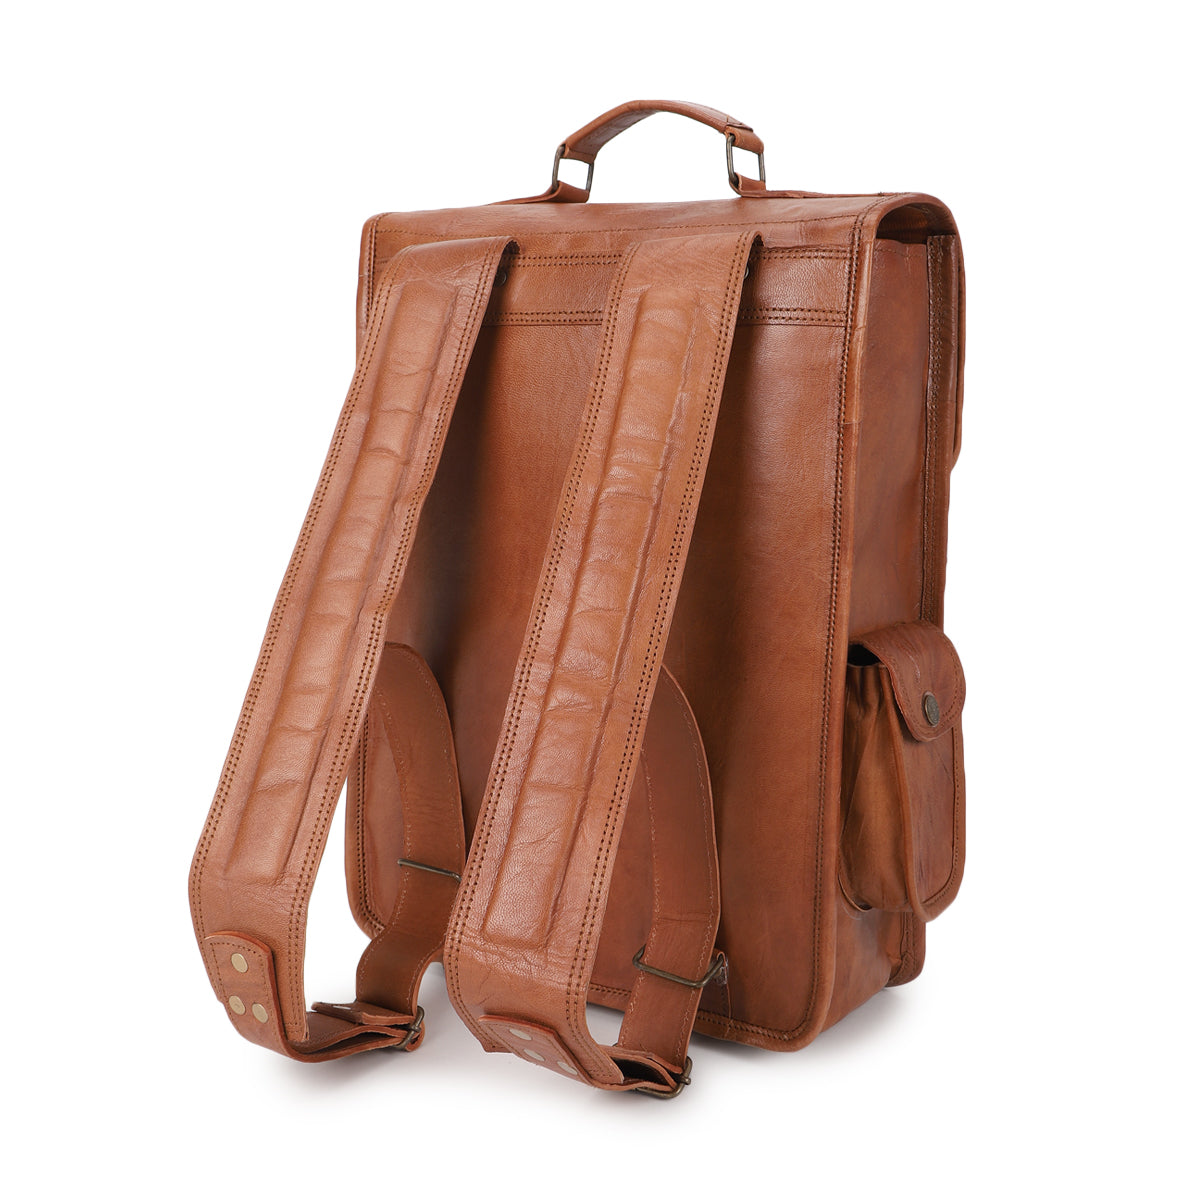 back view od brown leather backpack